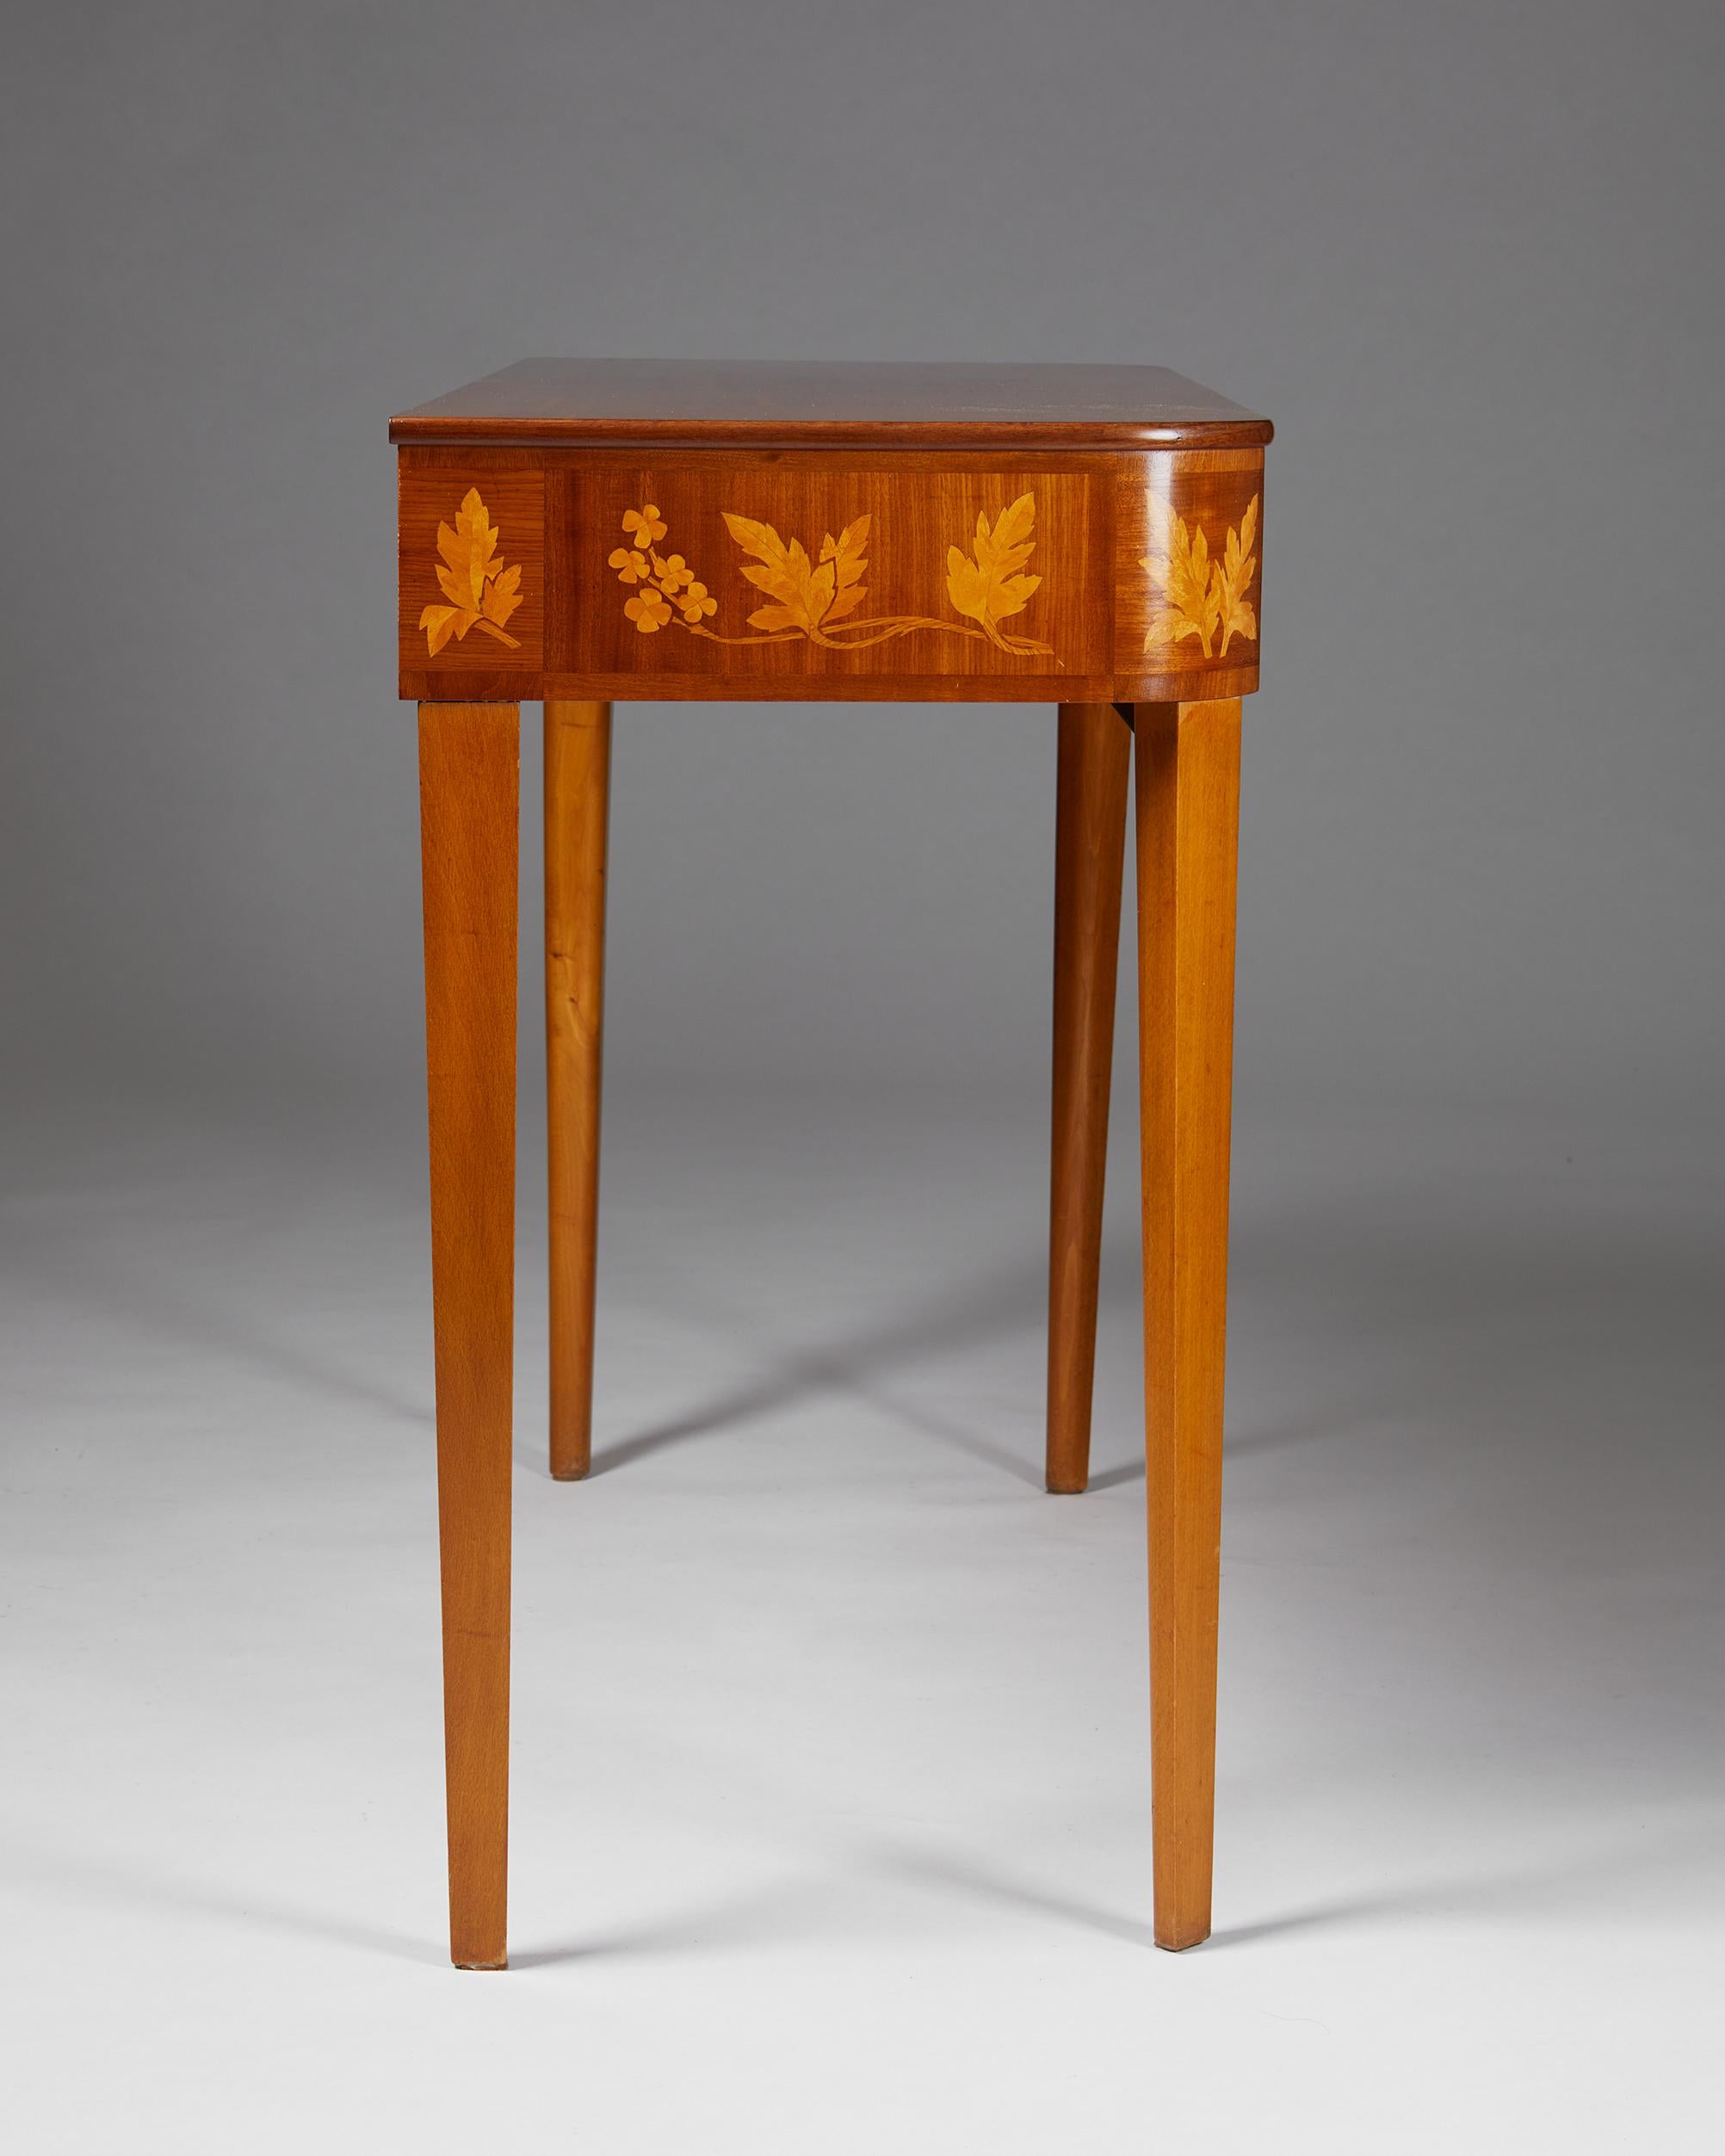 20th Century Small Desk / Side Table “Guanabara” Designed by Carl Malmsten, Sweden, 1950’s